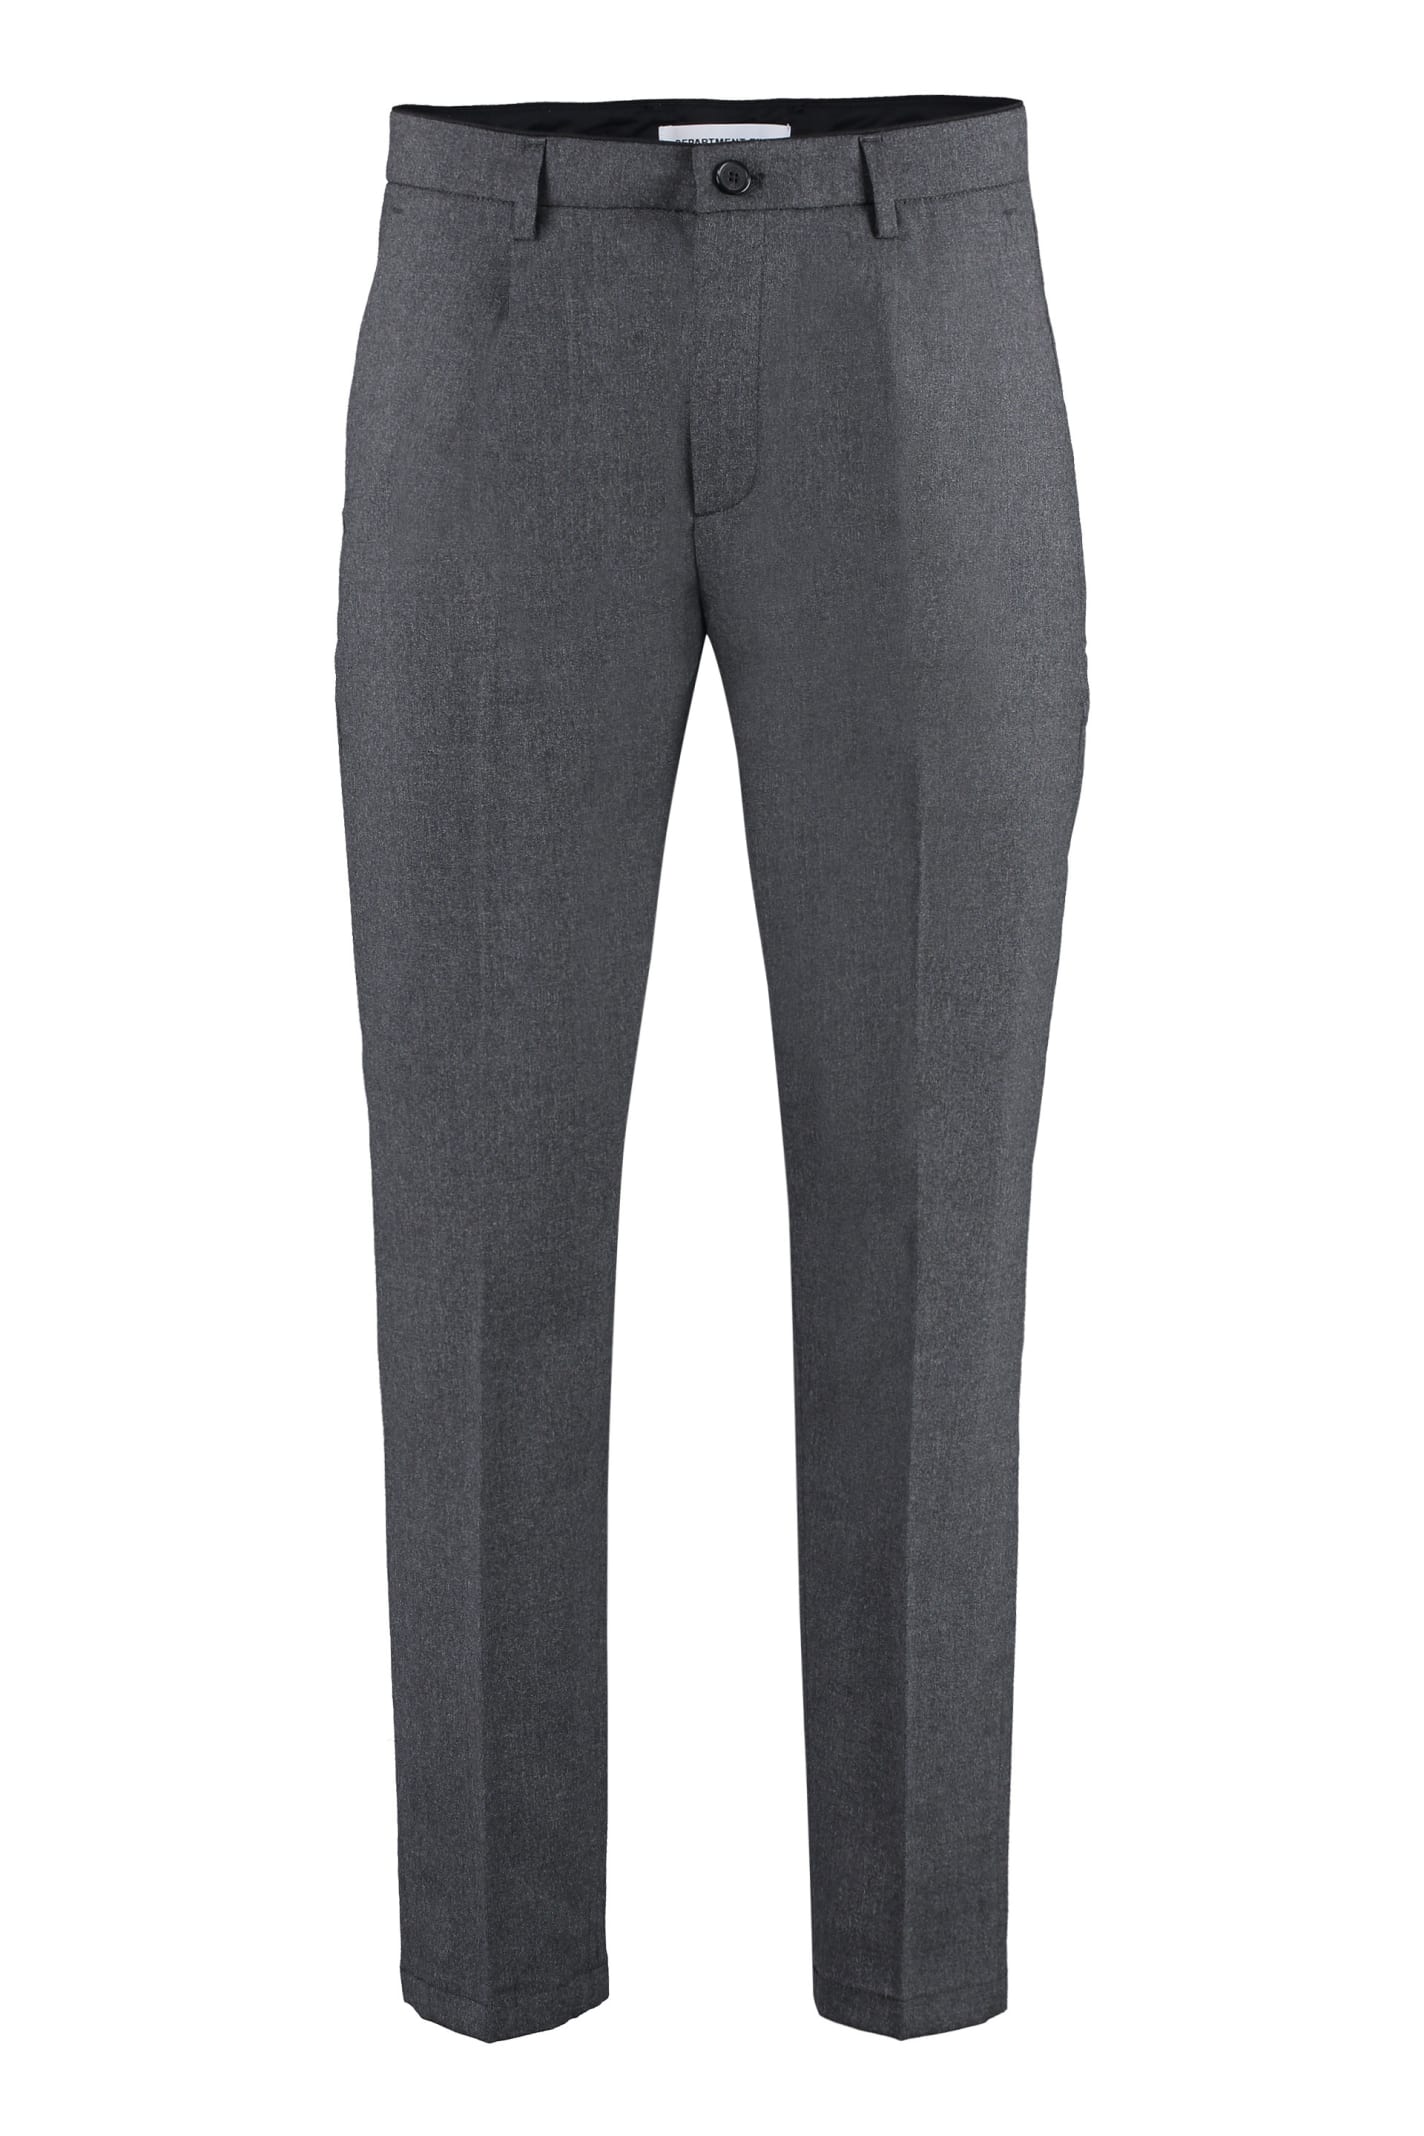 Department Five Prince Wool Blend Trousers